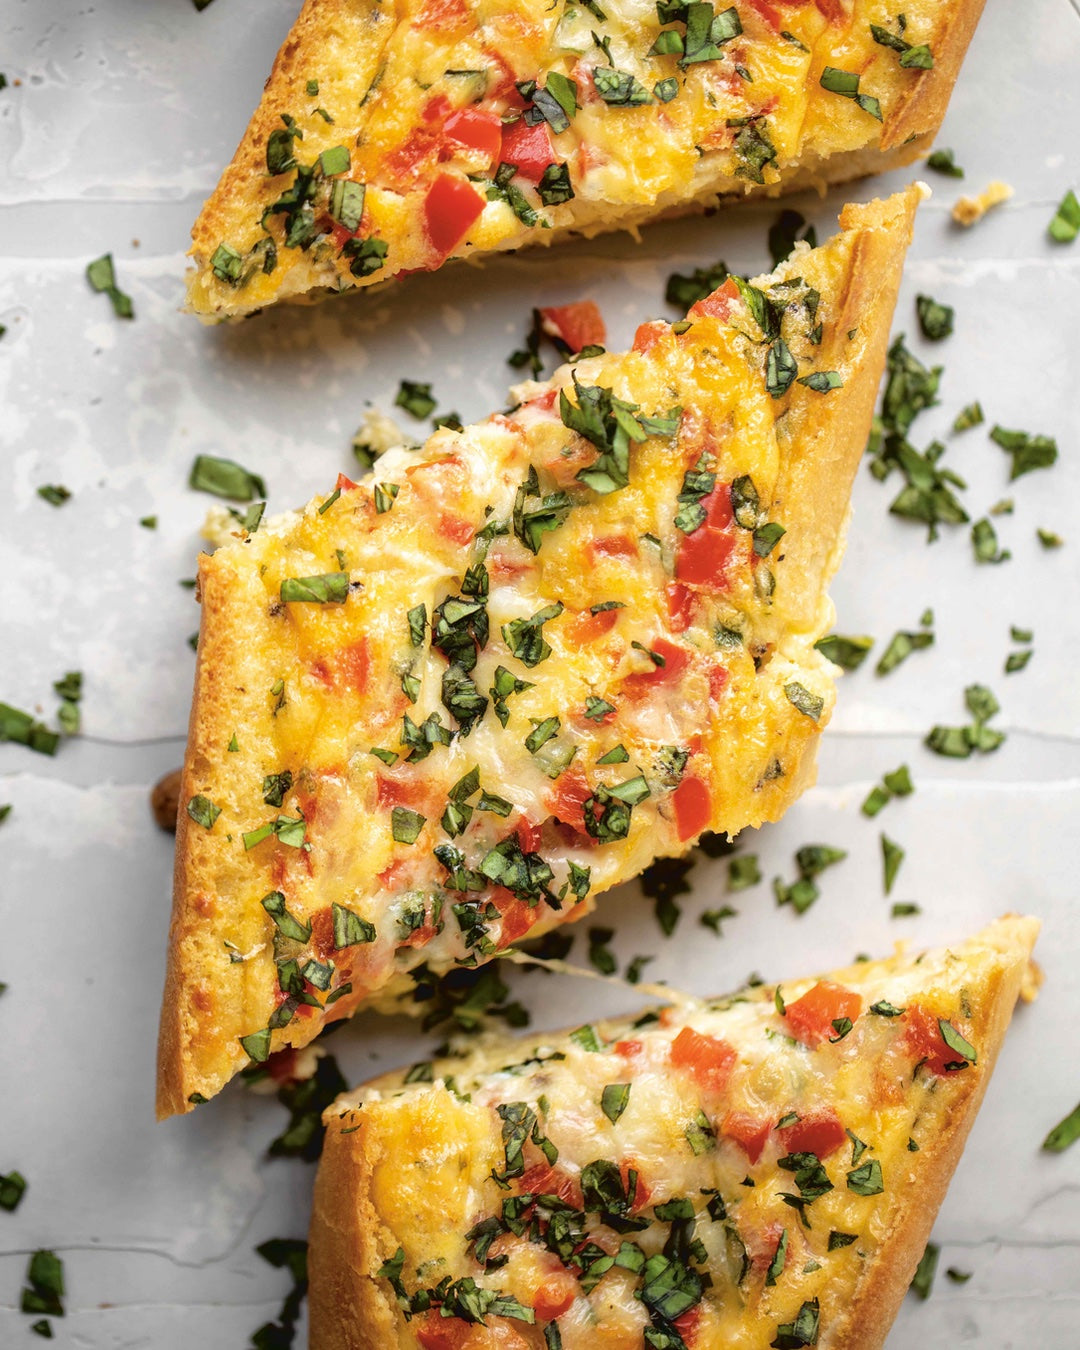 A flexible baked egg baguette recipe made with a creamy egg, cheese, seasonings, and diced vegetables filling. | peteandgerrys.com